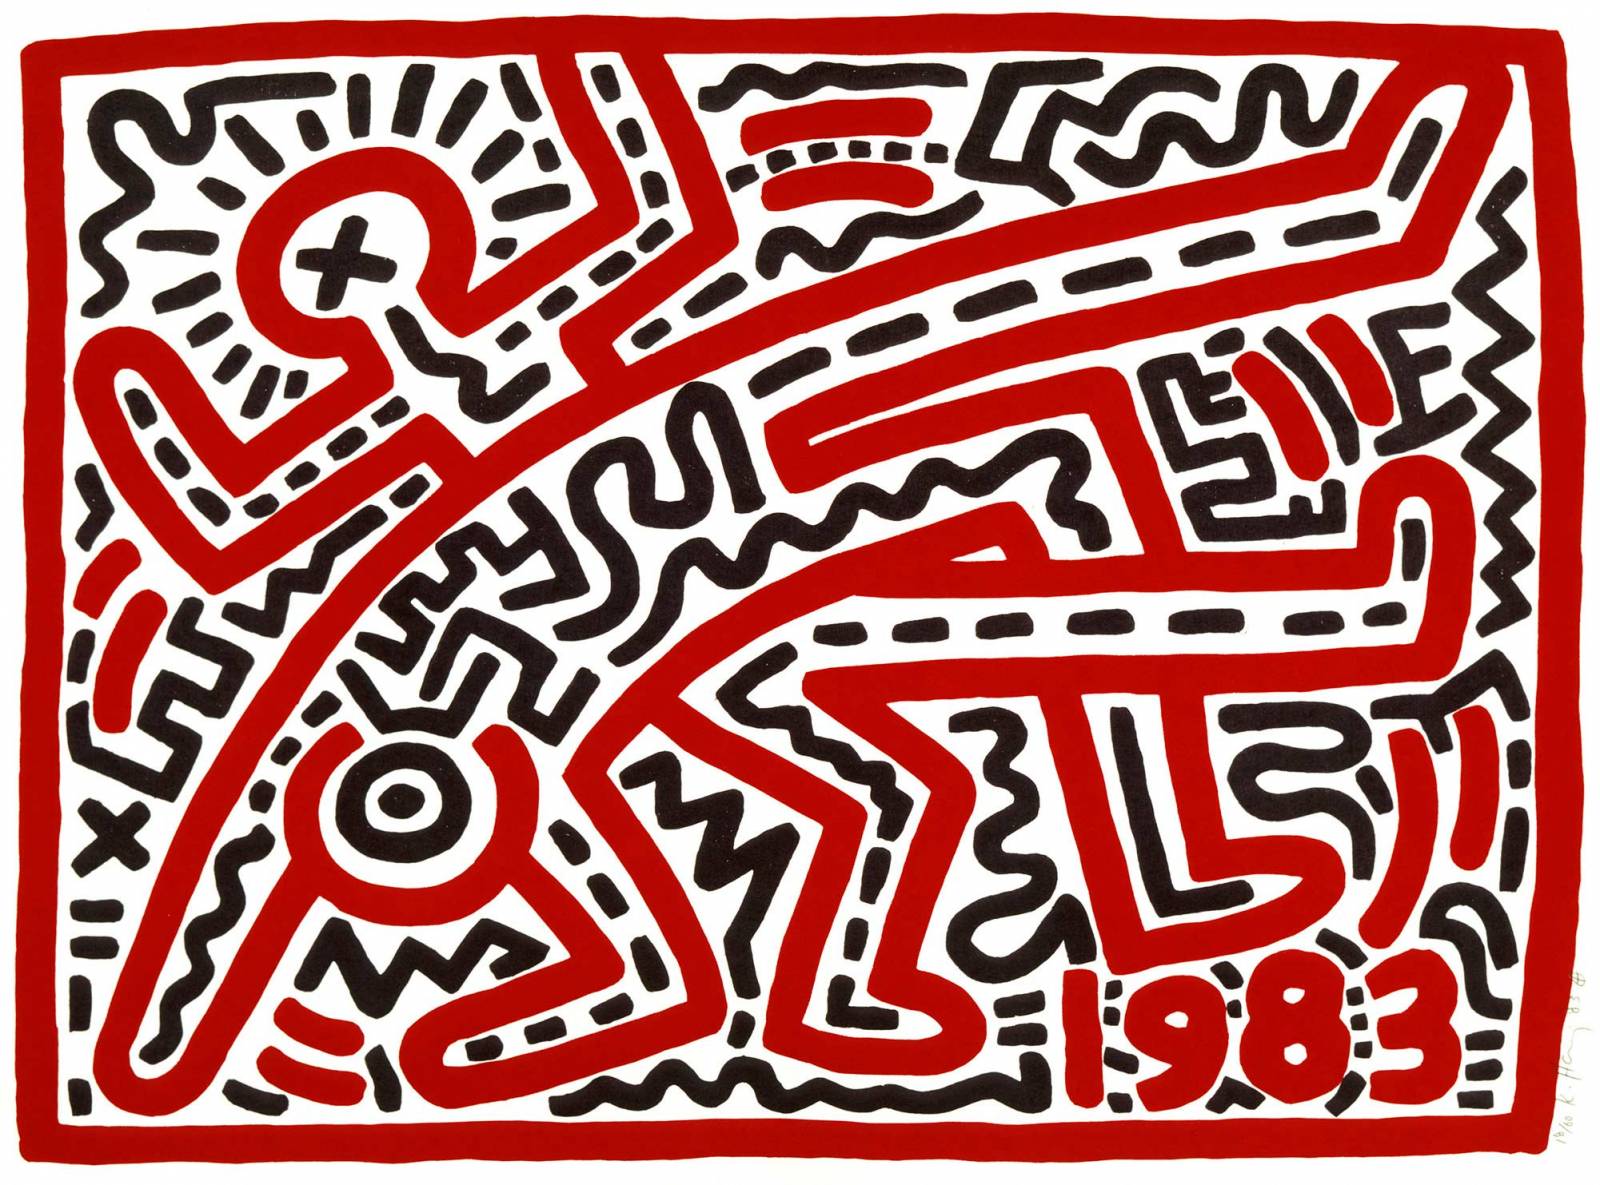 „Bez tytułu”, Keith Haring, 1983, ( Fot.Collection of the Keith Haring Foundation)